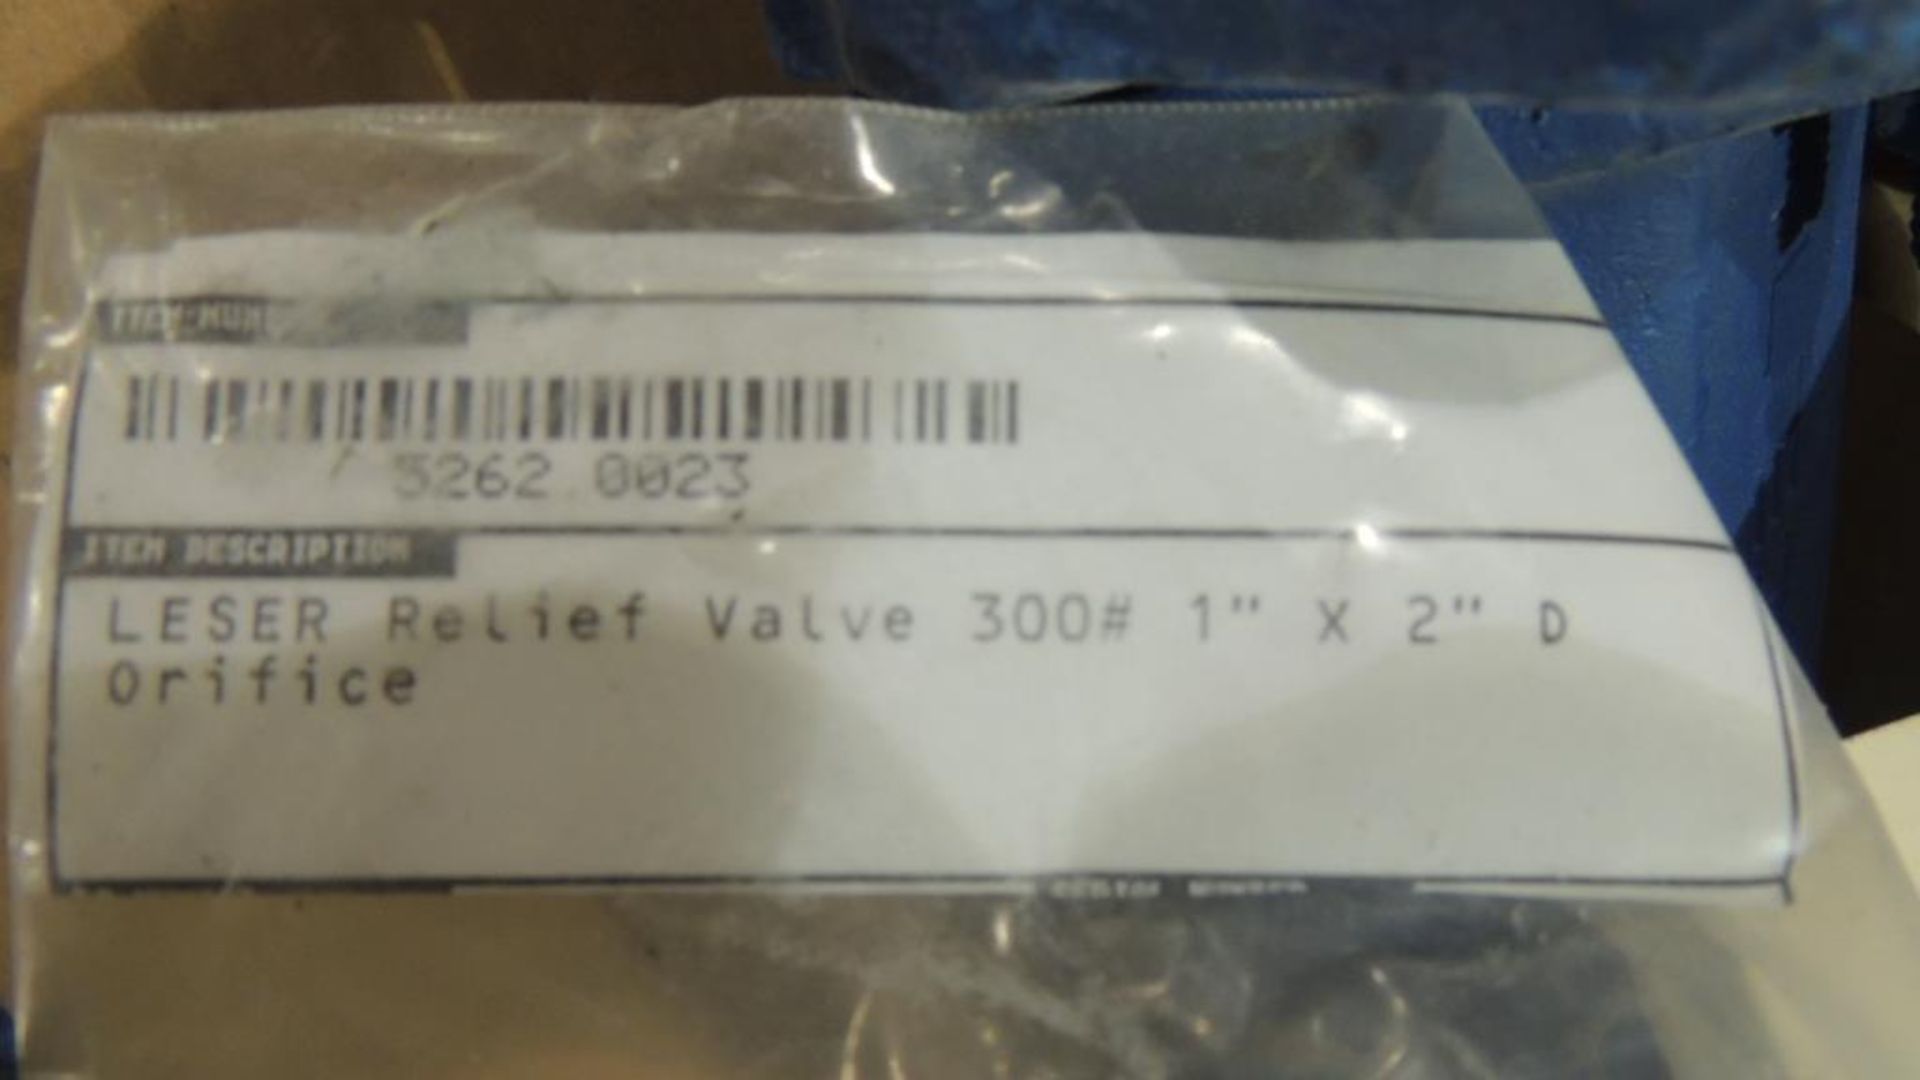 Large Quantity of Leser Relief and Safety Valves, plus Spare Parts Kits - Image 53 of 374